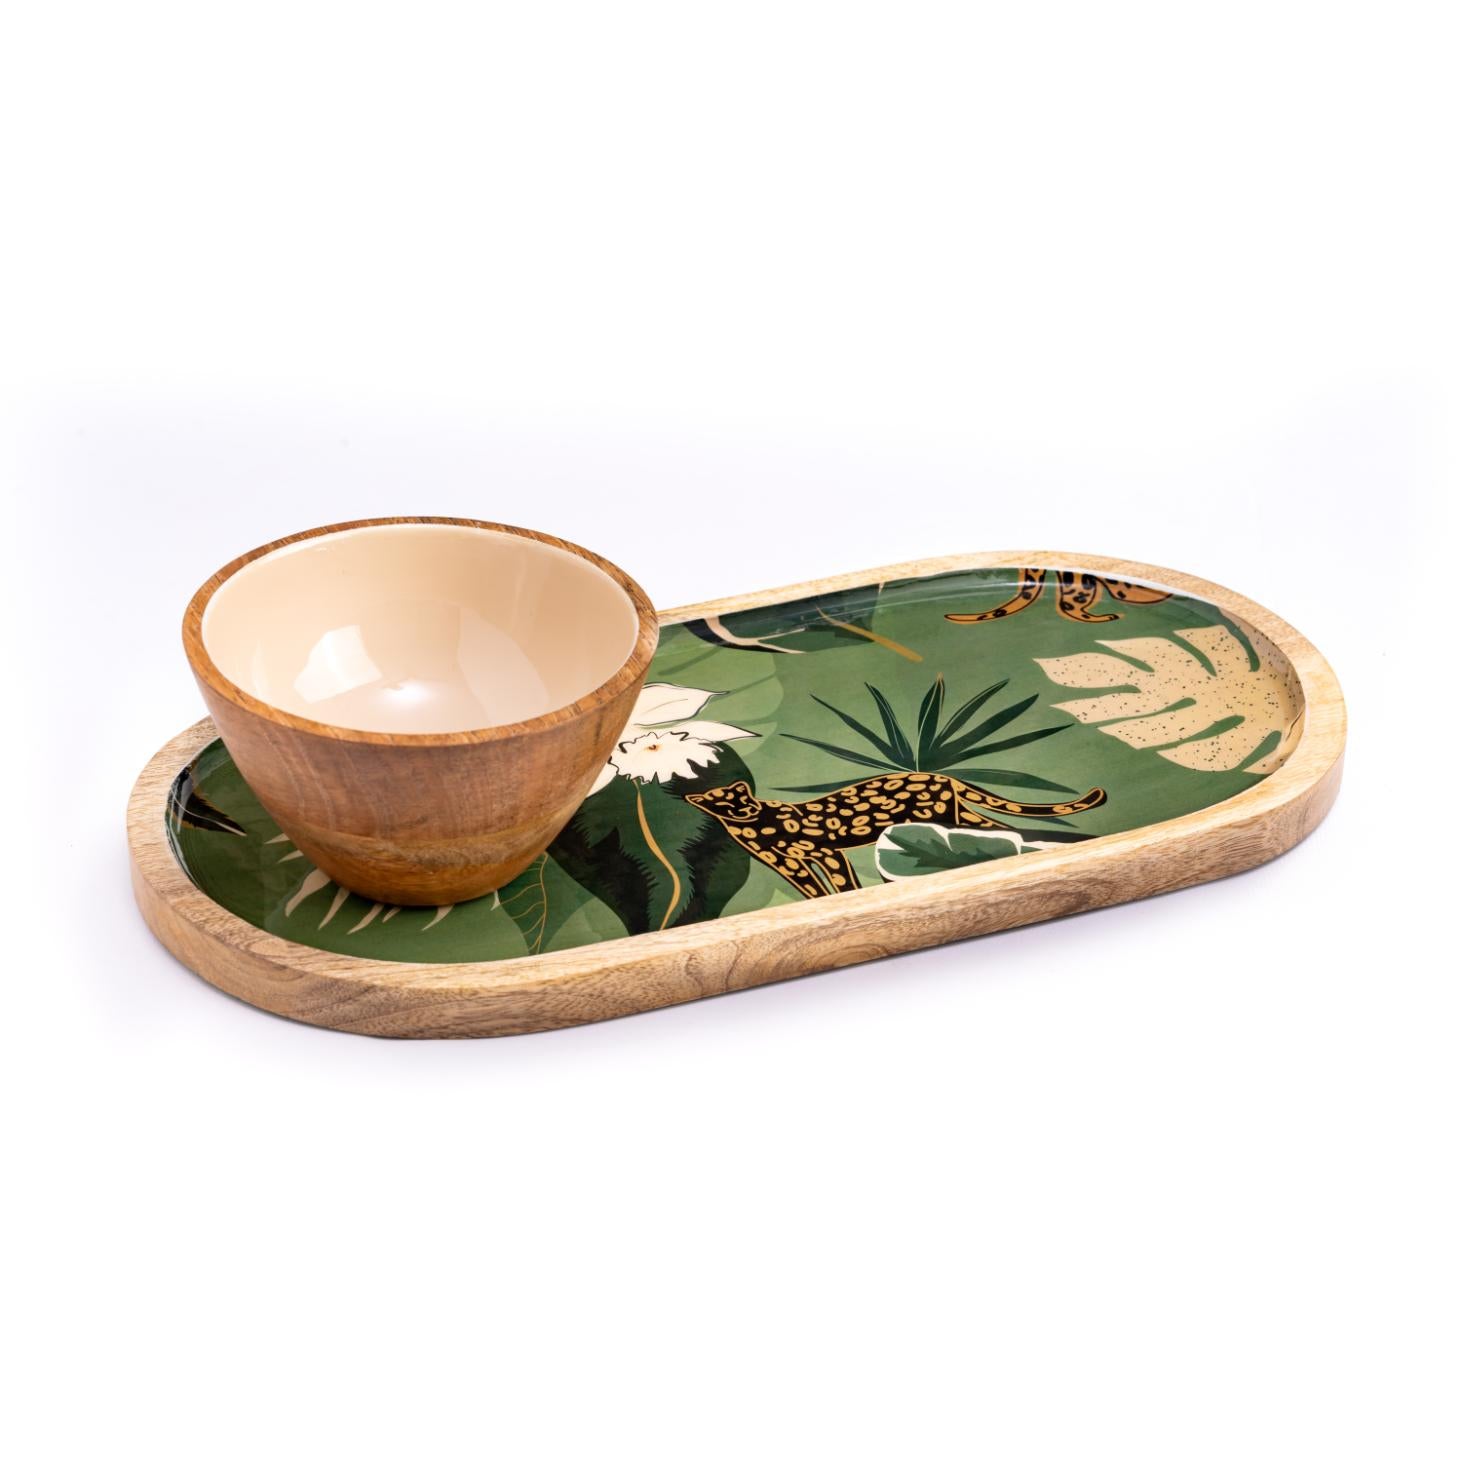 Wooden Platter with bowl